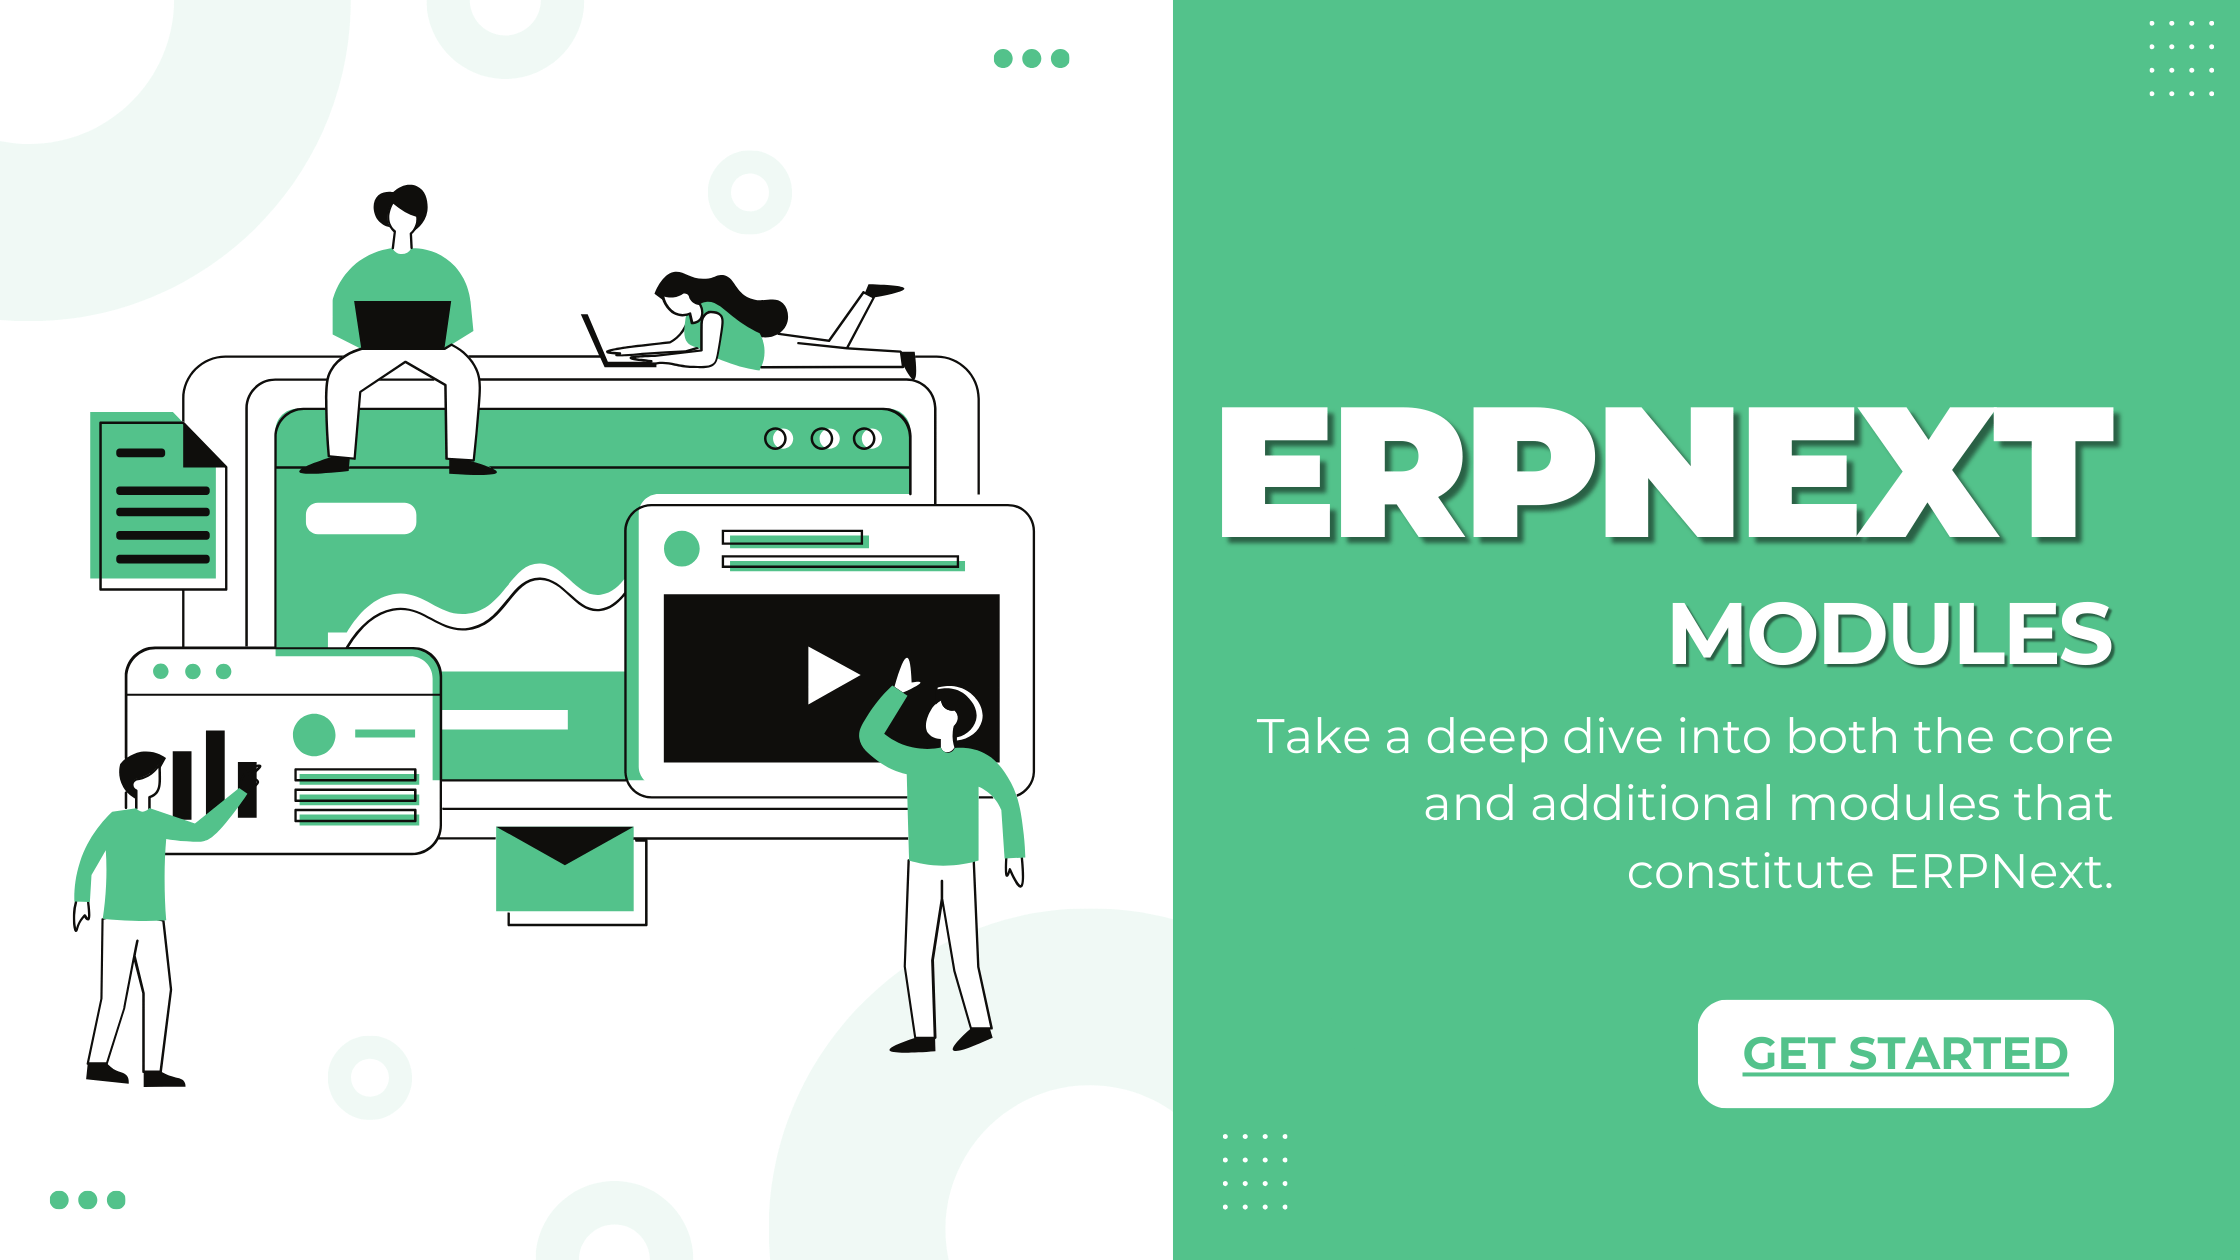 What are the modules in ERPNext? 